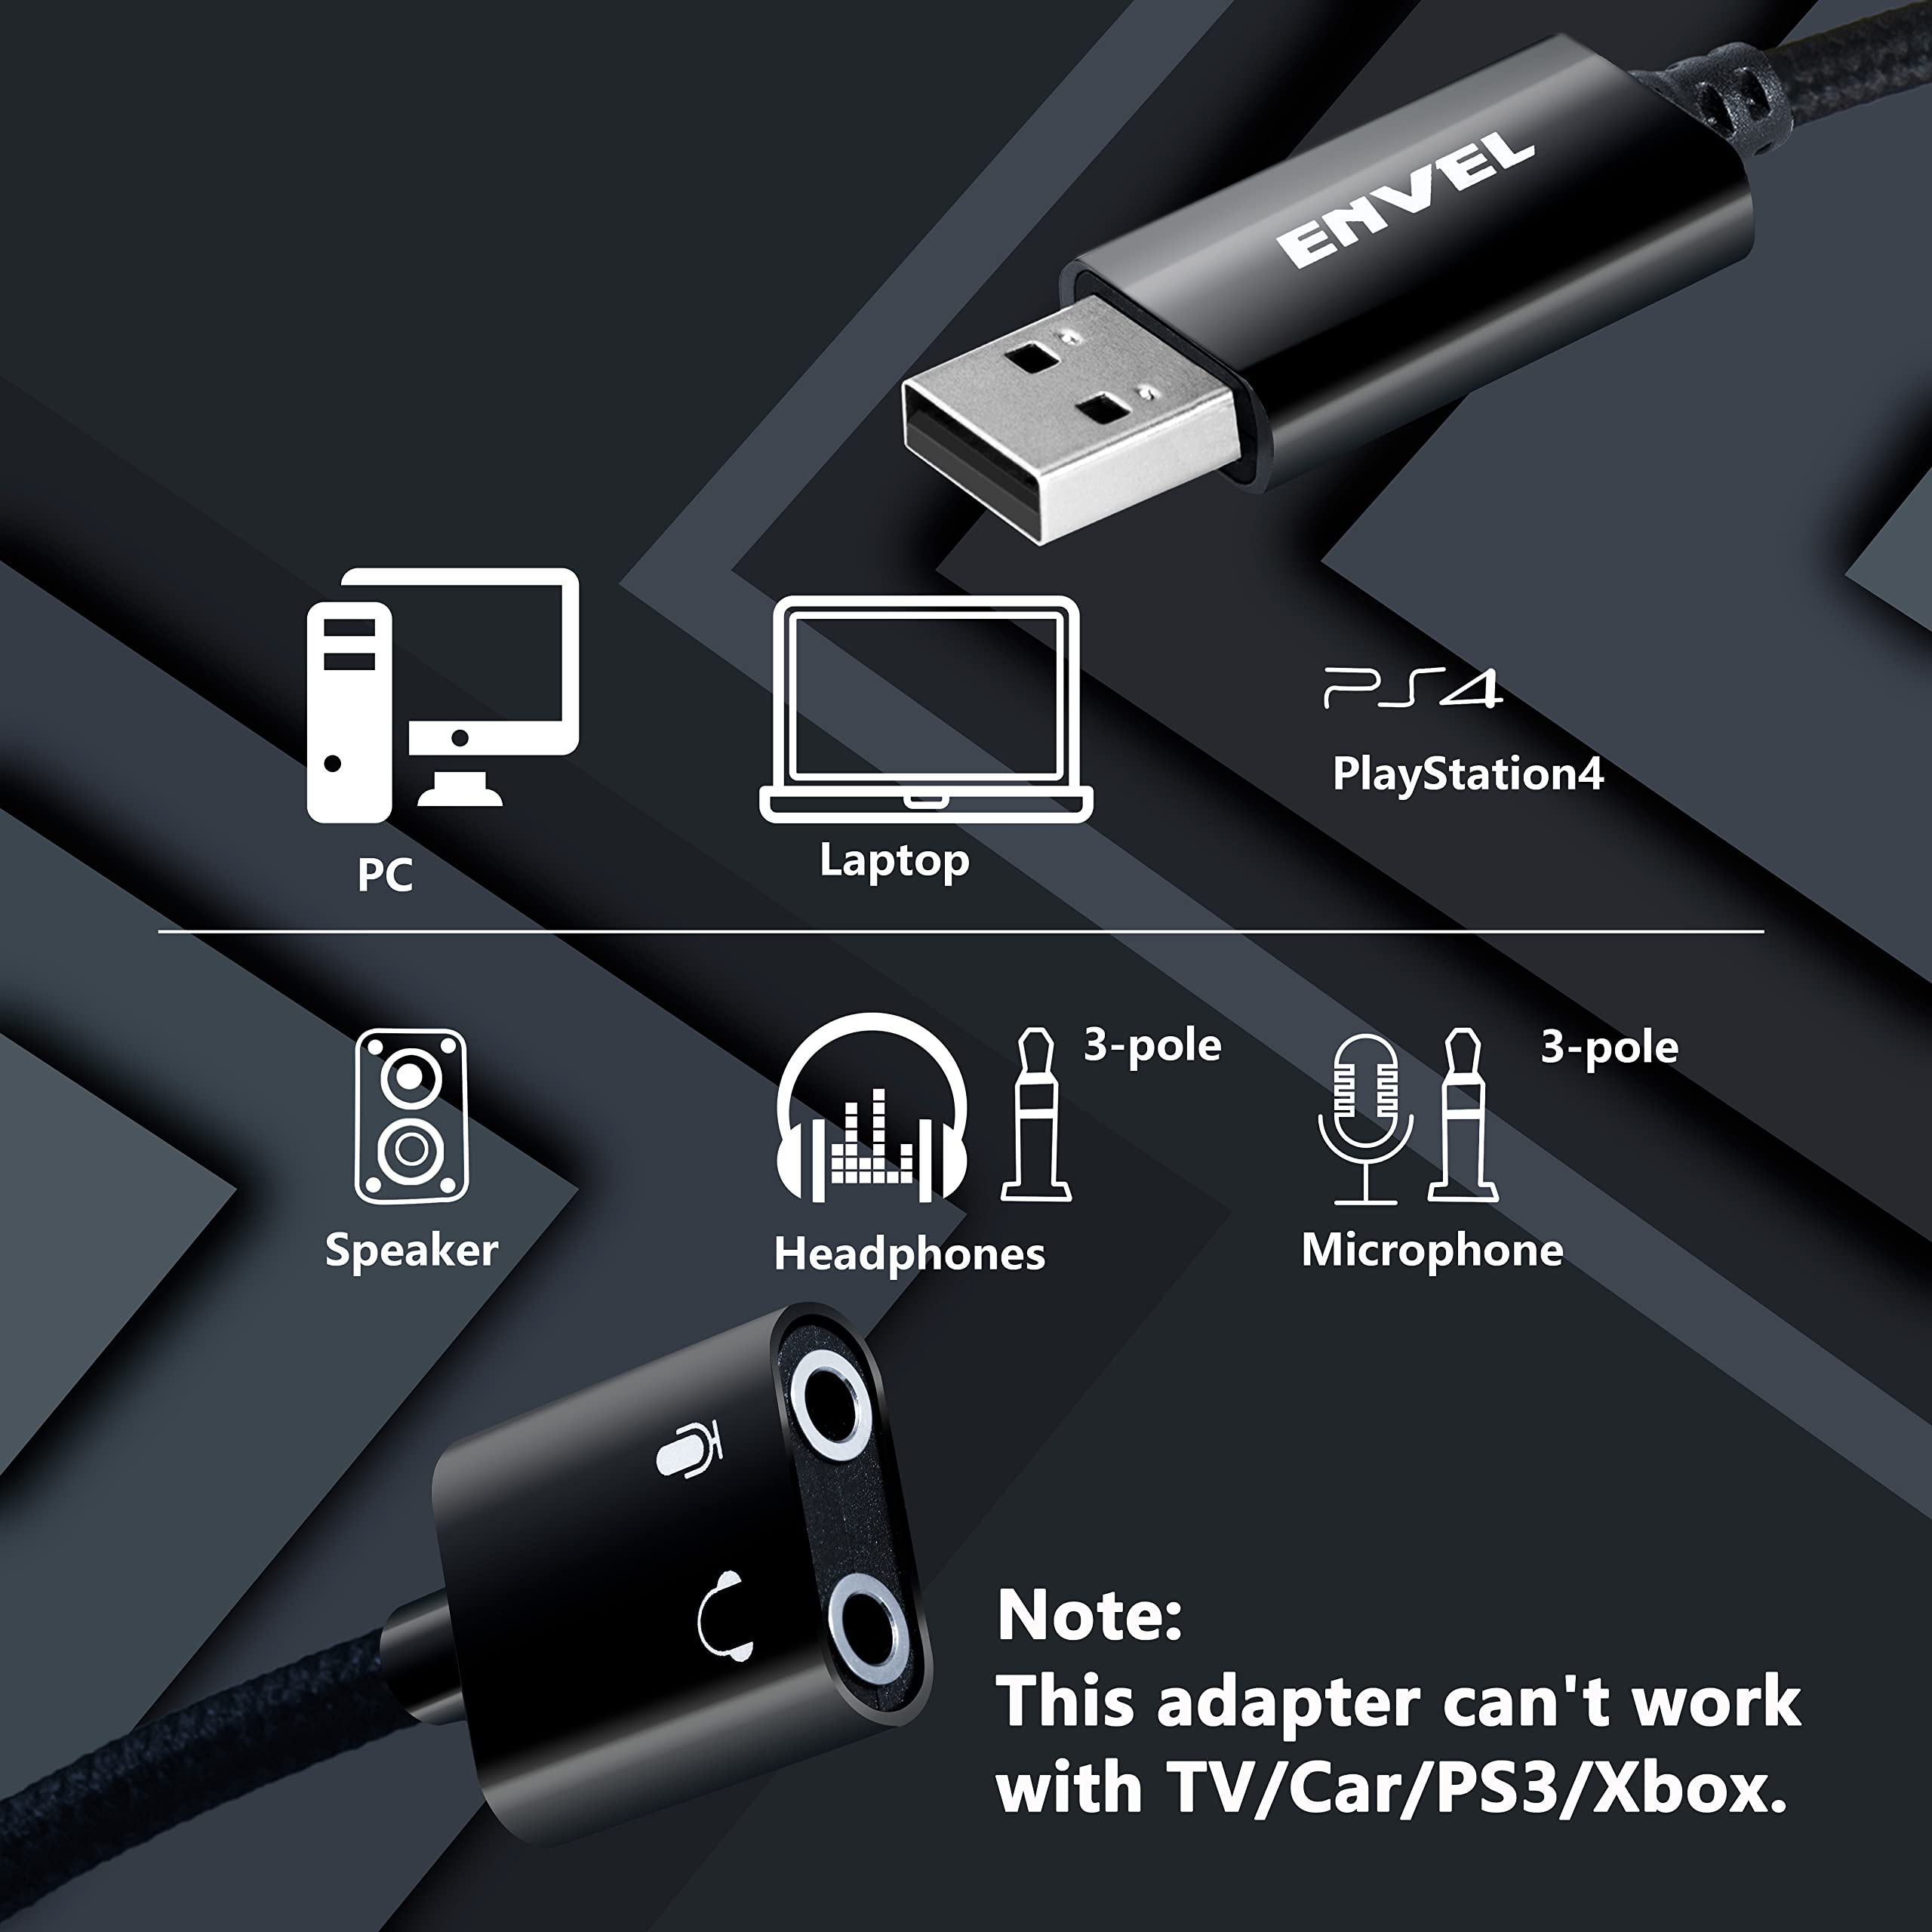 ENVEL USB to 3.5mm Audio Adapter,External Stereo Sound Card with Dual TRS 3-Pole 3.5mm Headphone and Microphone Jack for PS4/PS5/PC/Laptop, Built-in Chip Mic-Supported Headphone Adapter (Black Pro)